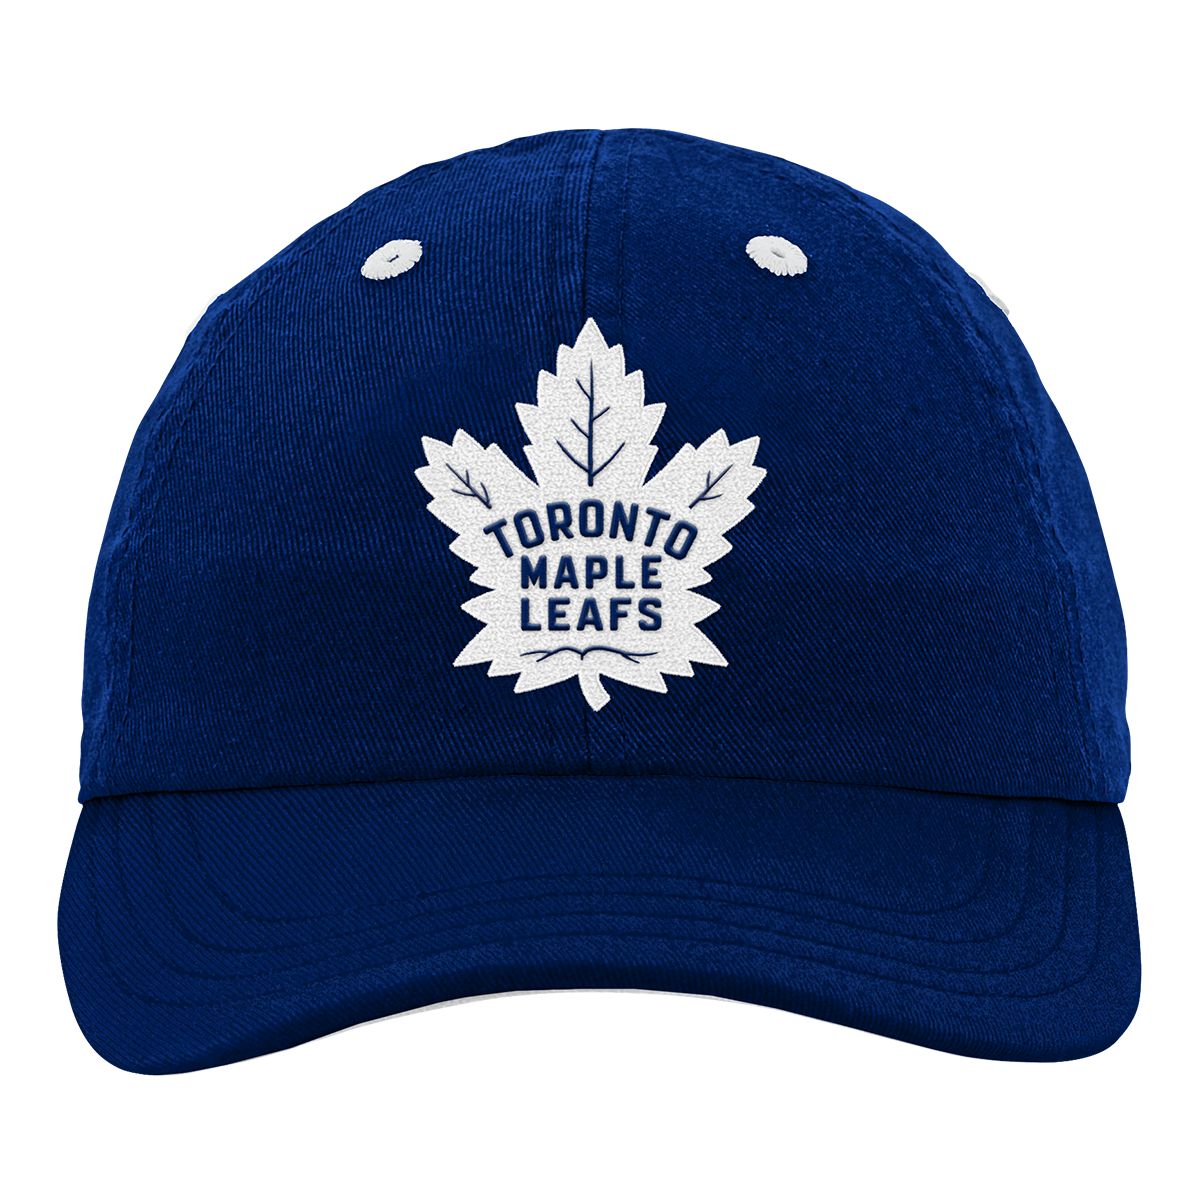 Image of Infant Toronto Maple Leafs Slouch Cap